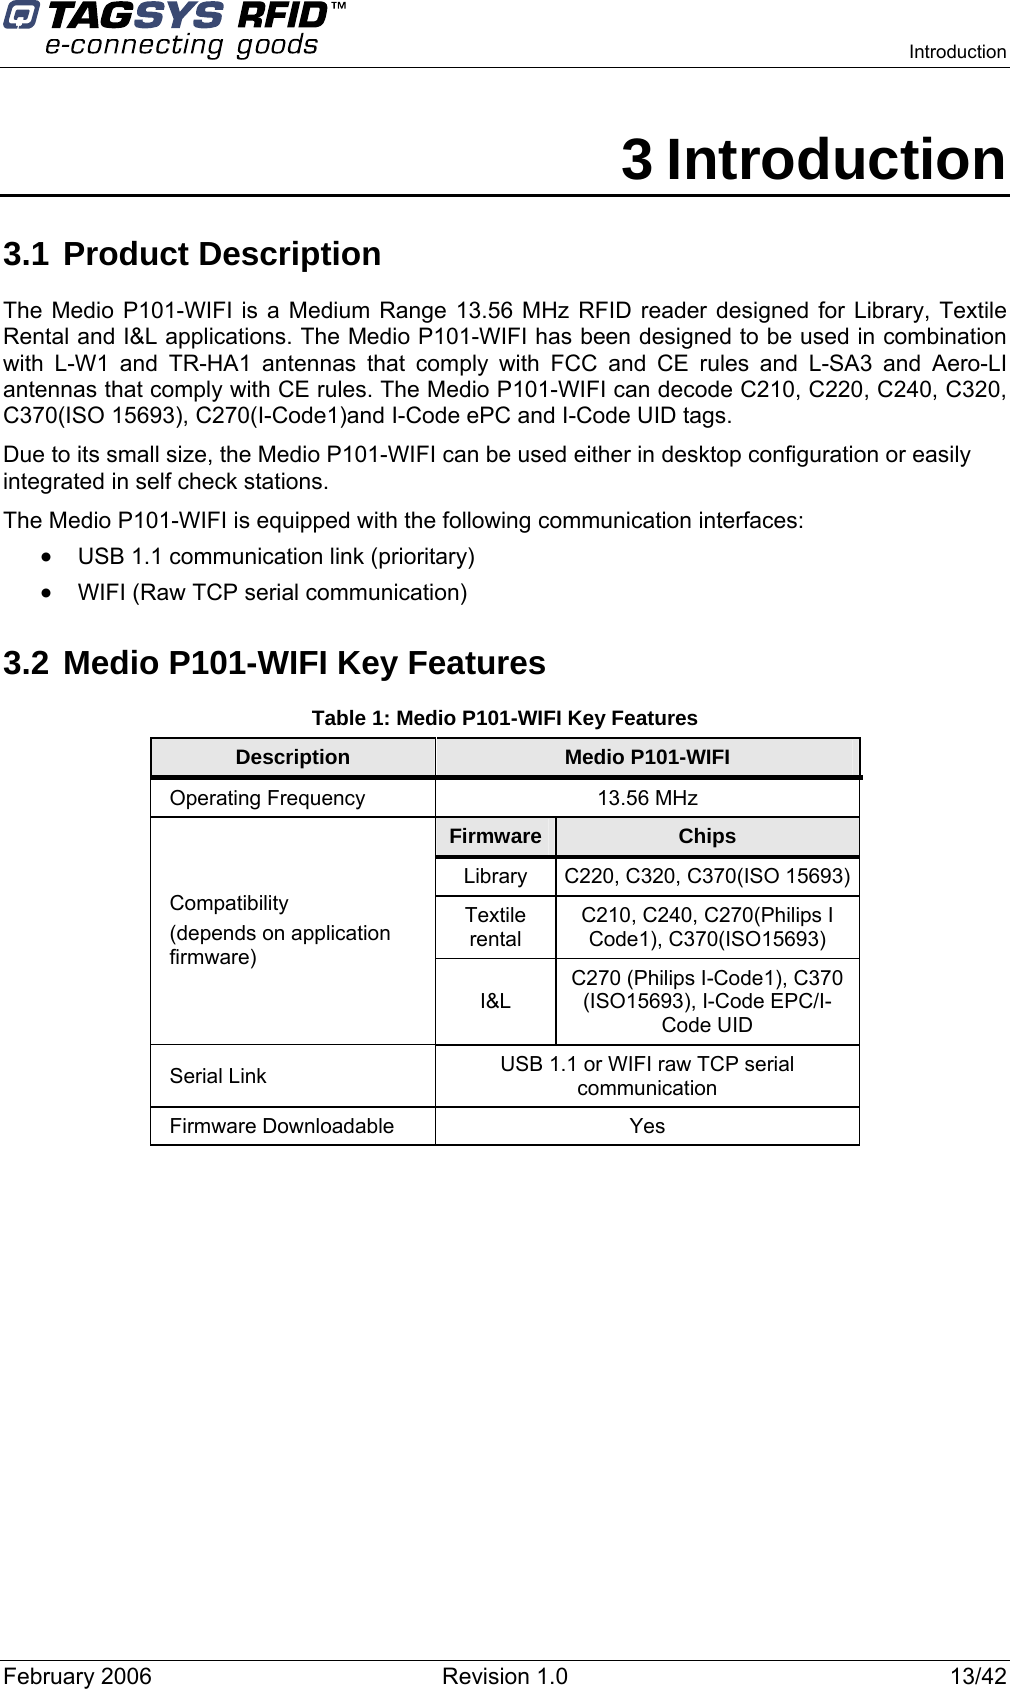    Introduction  February 2006  Revision 1.0  13/42 3 Introduction 3.1 Product Description The Medio P101-WIFI is a Medium Range 13.56 MHz RFID reader designed for Library, Textile Rental and I&amp;L applications. The Medio P101-WIFI has been designed to be used in combination with L-W1 and TR-HA1 antennas that comply with FCC and CE rules and L-SA3 and Aero-LI antennas that comply with CE rules. The Medio P101-WIFI can decode C210, C220, C240, C320, C370(ISO 15693), C270(I-Code1)and I-Code ePC and I-Code UID tags. Due to its small size, the Medio P101-WIFI can be used either in desktop configuration or easily integrated in self check stations. The Medio P101-WIFI is equipped with the following communication interfaces: • USB 1.1 communication link (prioritary) • WIFI (Raw TCP serial communication) 3.2 Medio P101-WIFI Key Features Table 1: Medio P101-WIFI Key Features Description  Medio P101-WIFI Operating Frequency  13.56 MHz Firmware  Chips Library  C220, C320, C370(ISO 15693) Textile rental C210, C240, C270(Philips I Code1), C370(ISO15693) Compatibility  (depends on application firmware) I&amp;L C270 (Philips I-Code1), C370 (ISO15693), I-Code EPC/I-Code UID Serial Link  USB 1.1 or WIFI raw TCP serial communication Firmware Downloadable  Yes  